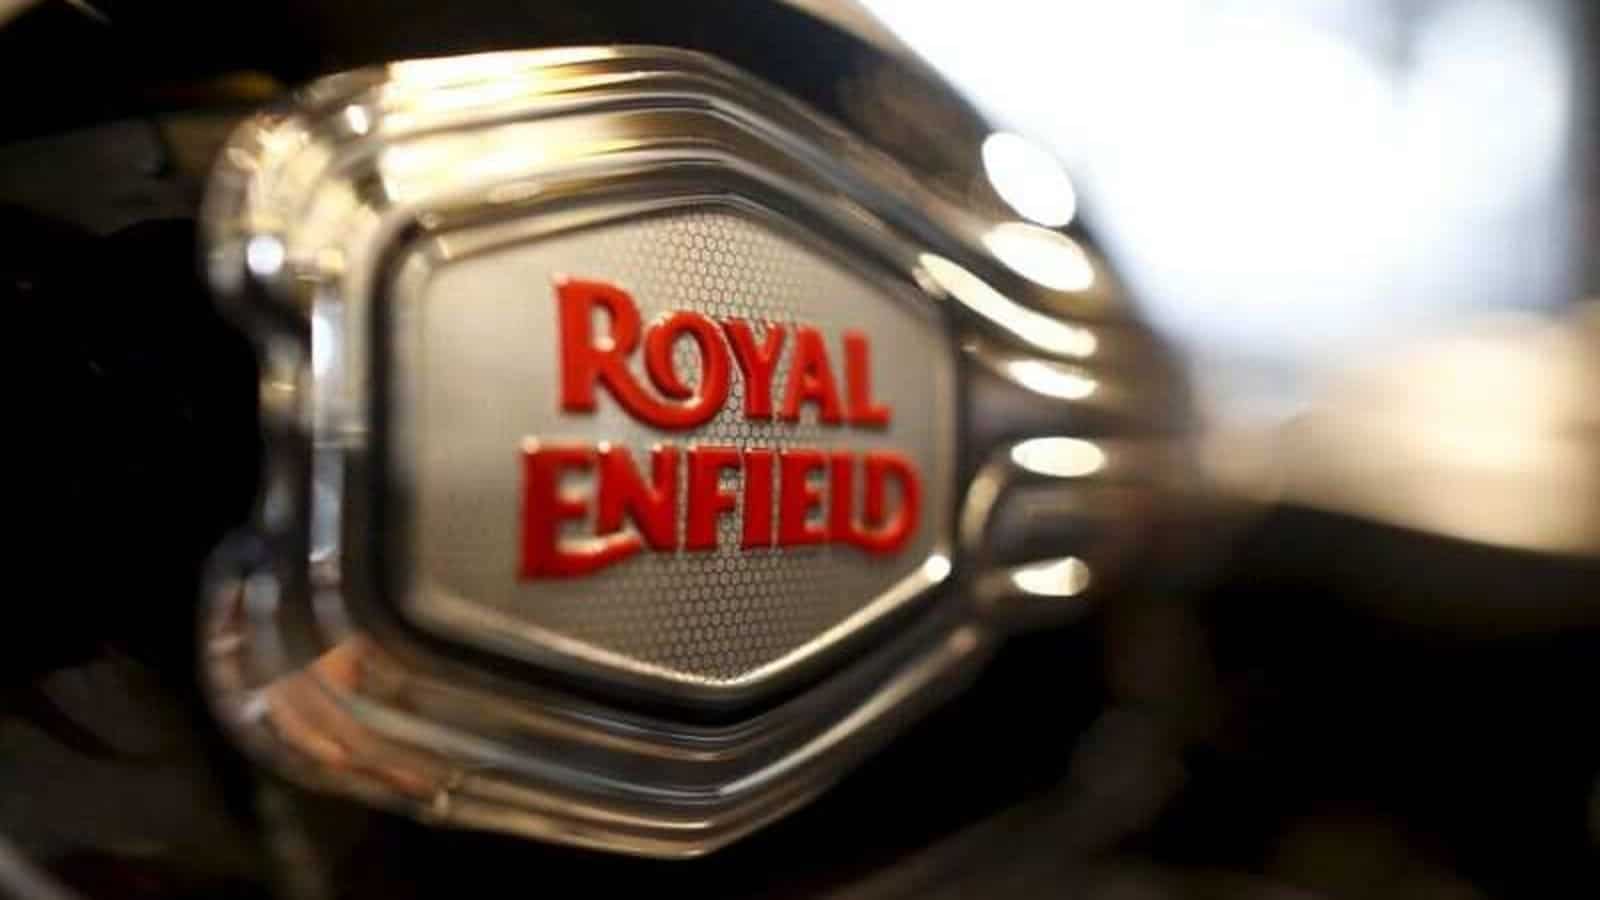 Royal Enfield to launch some 'very big models' this fiscal year. What to expect